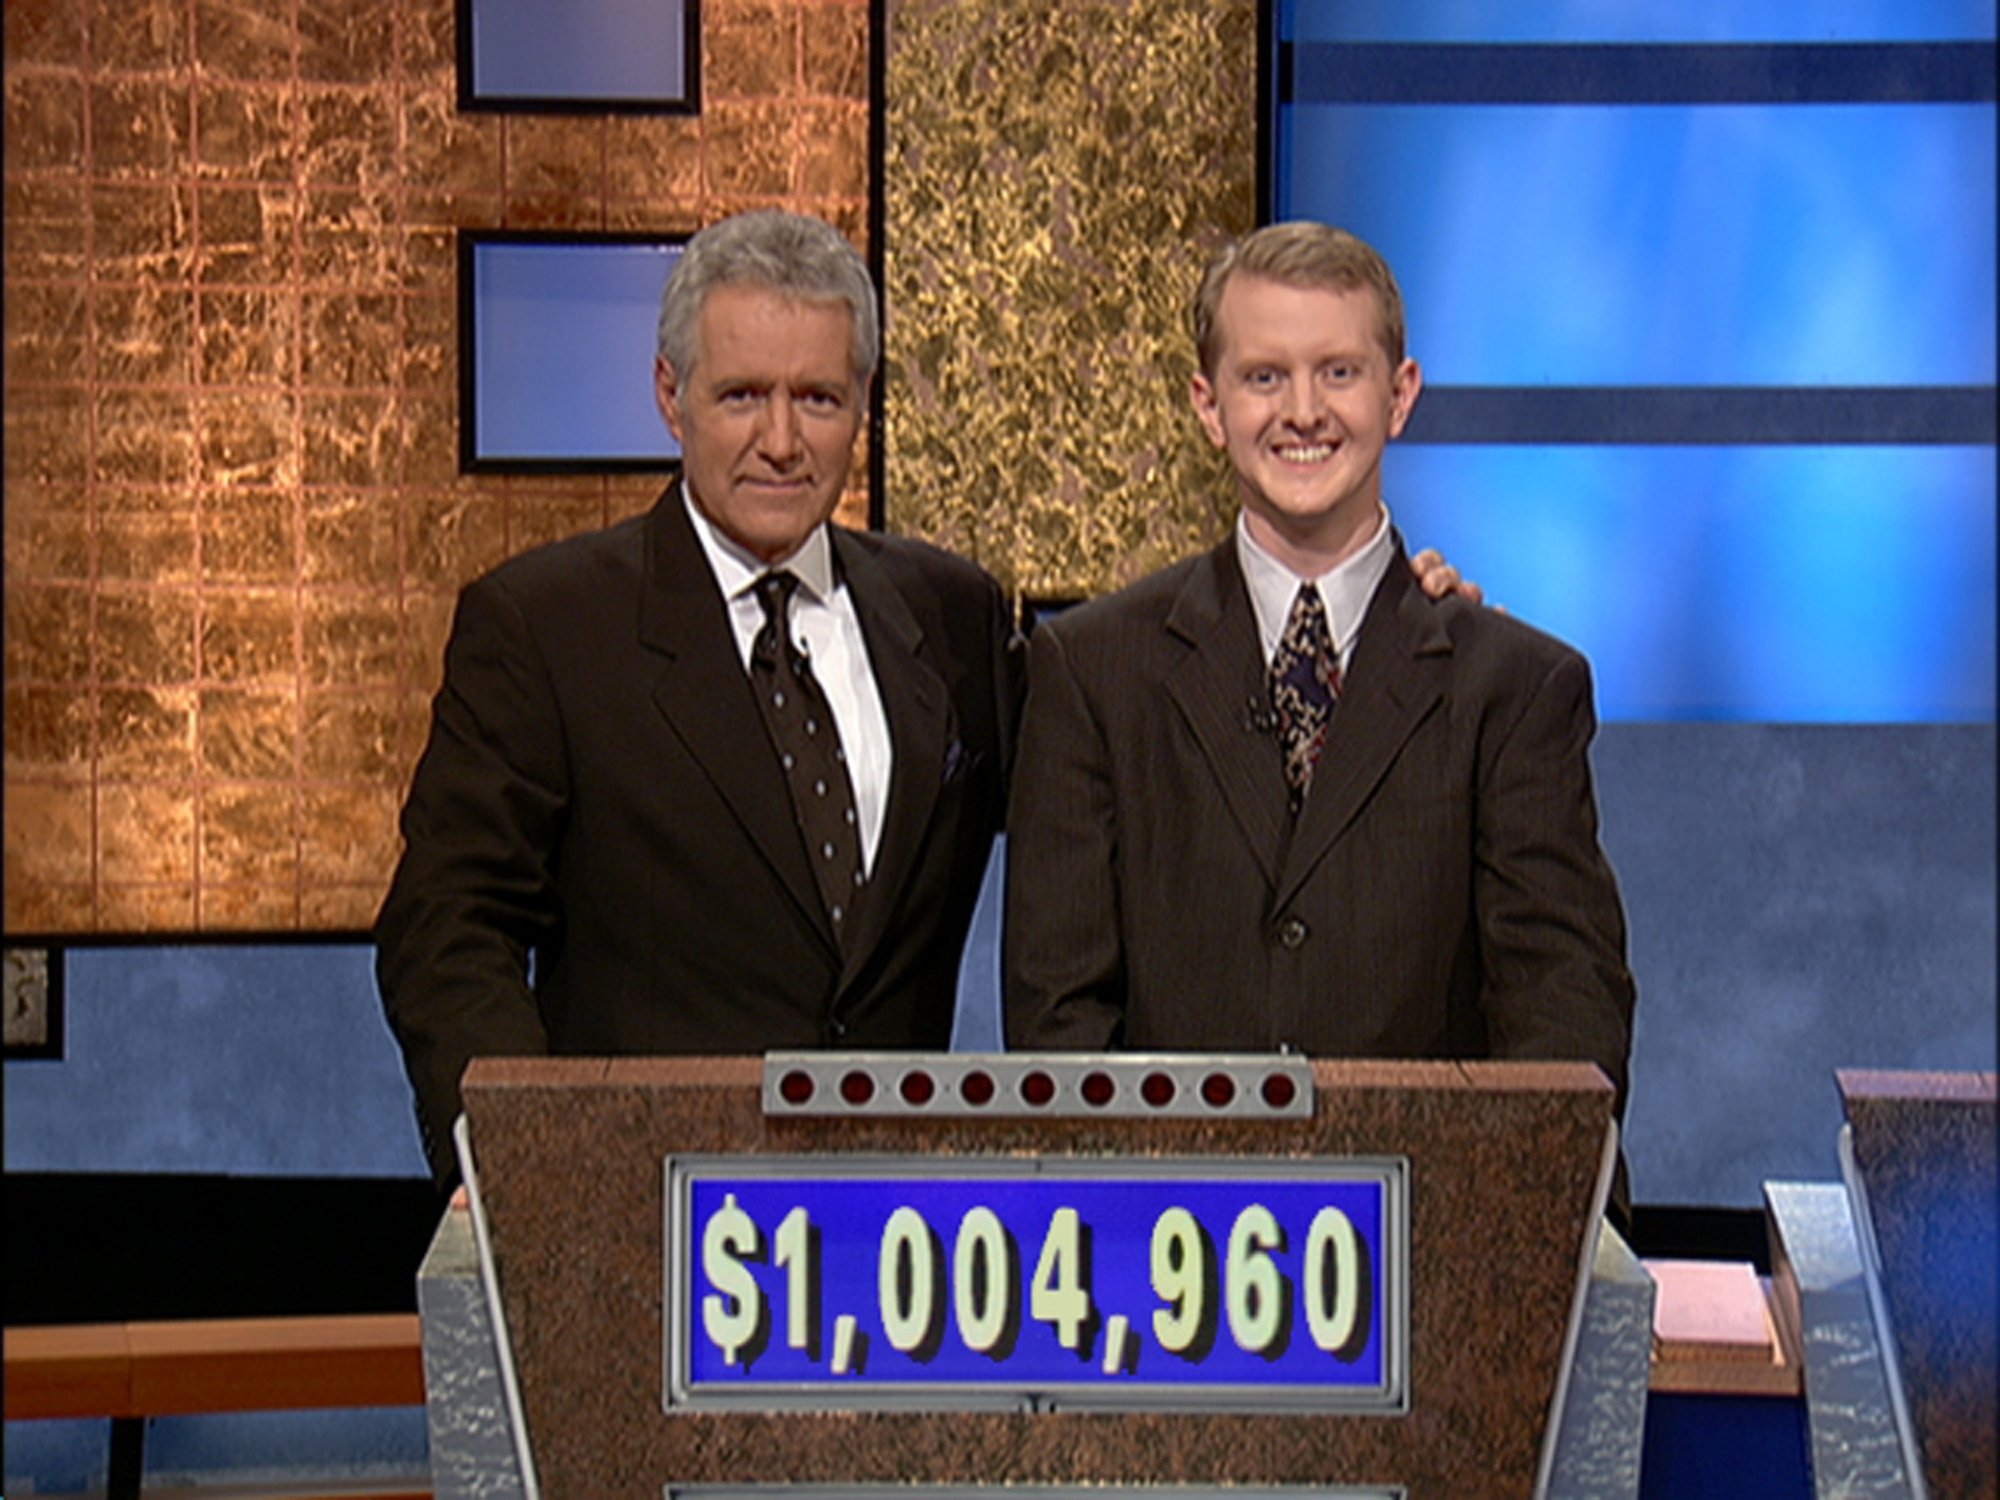 'Jeopardy!' Alex Trebek and casting contestant Ken Jennings. Trebek has his arm around Jennings, who are both wearing suits behind the game podium that reads $1,004,960 on the front.